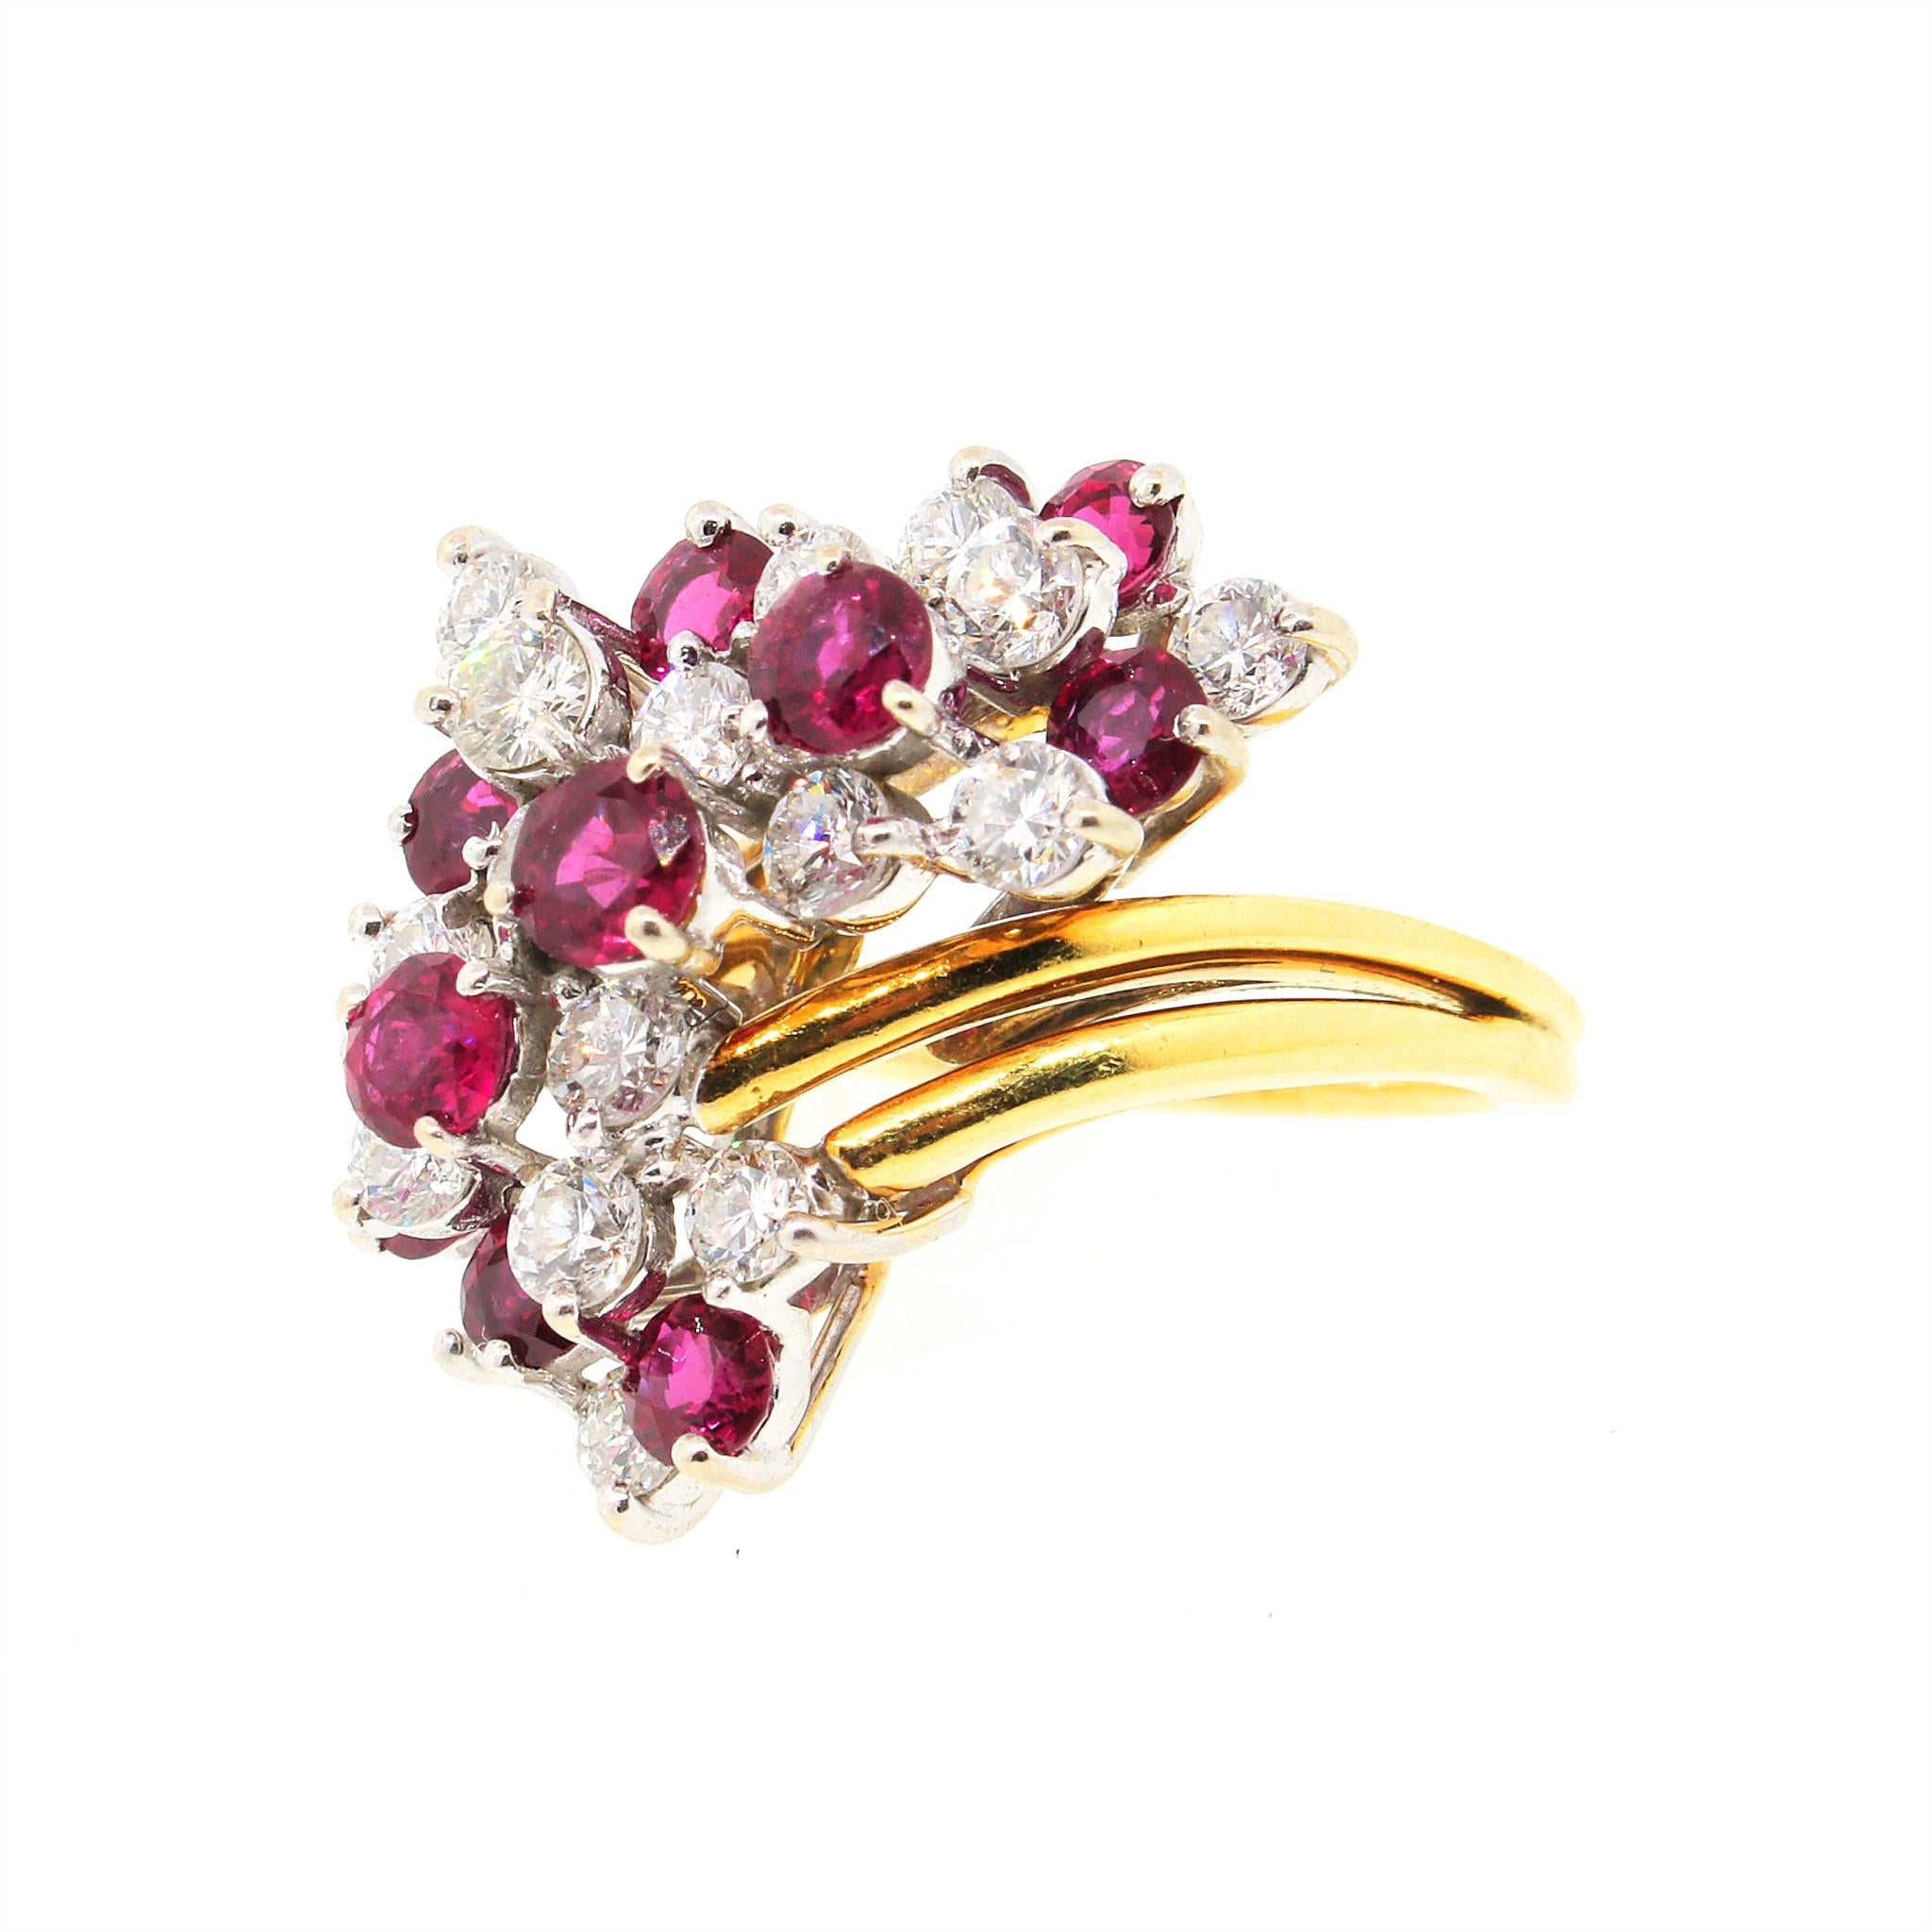 18 kt Yellow Gold
Diamond: 1.60 ct twd
Ruby: 1.70 tcw
Ring Size: 5.75
Total Weight: 11 grams